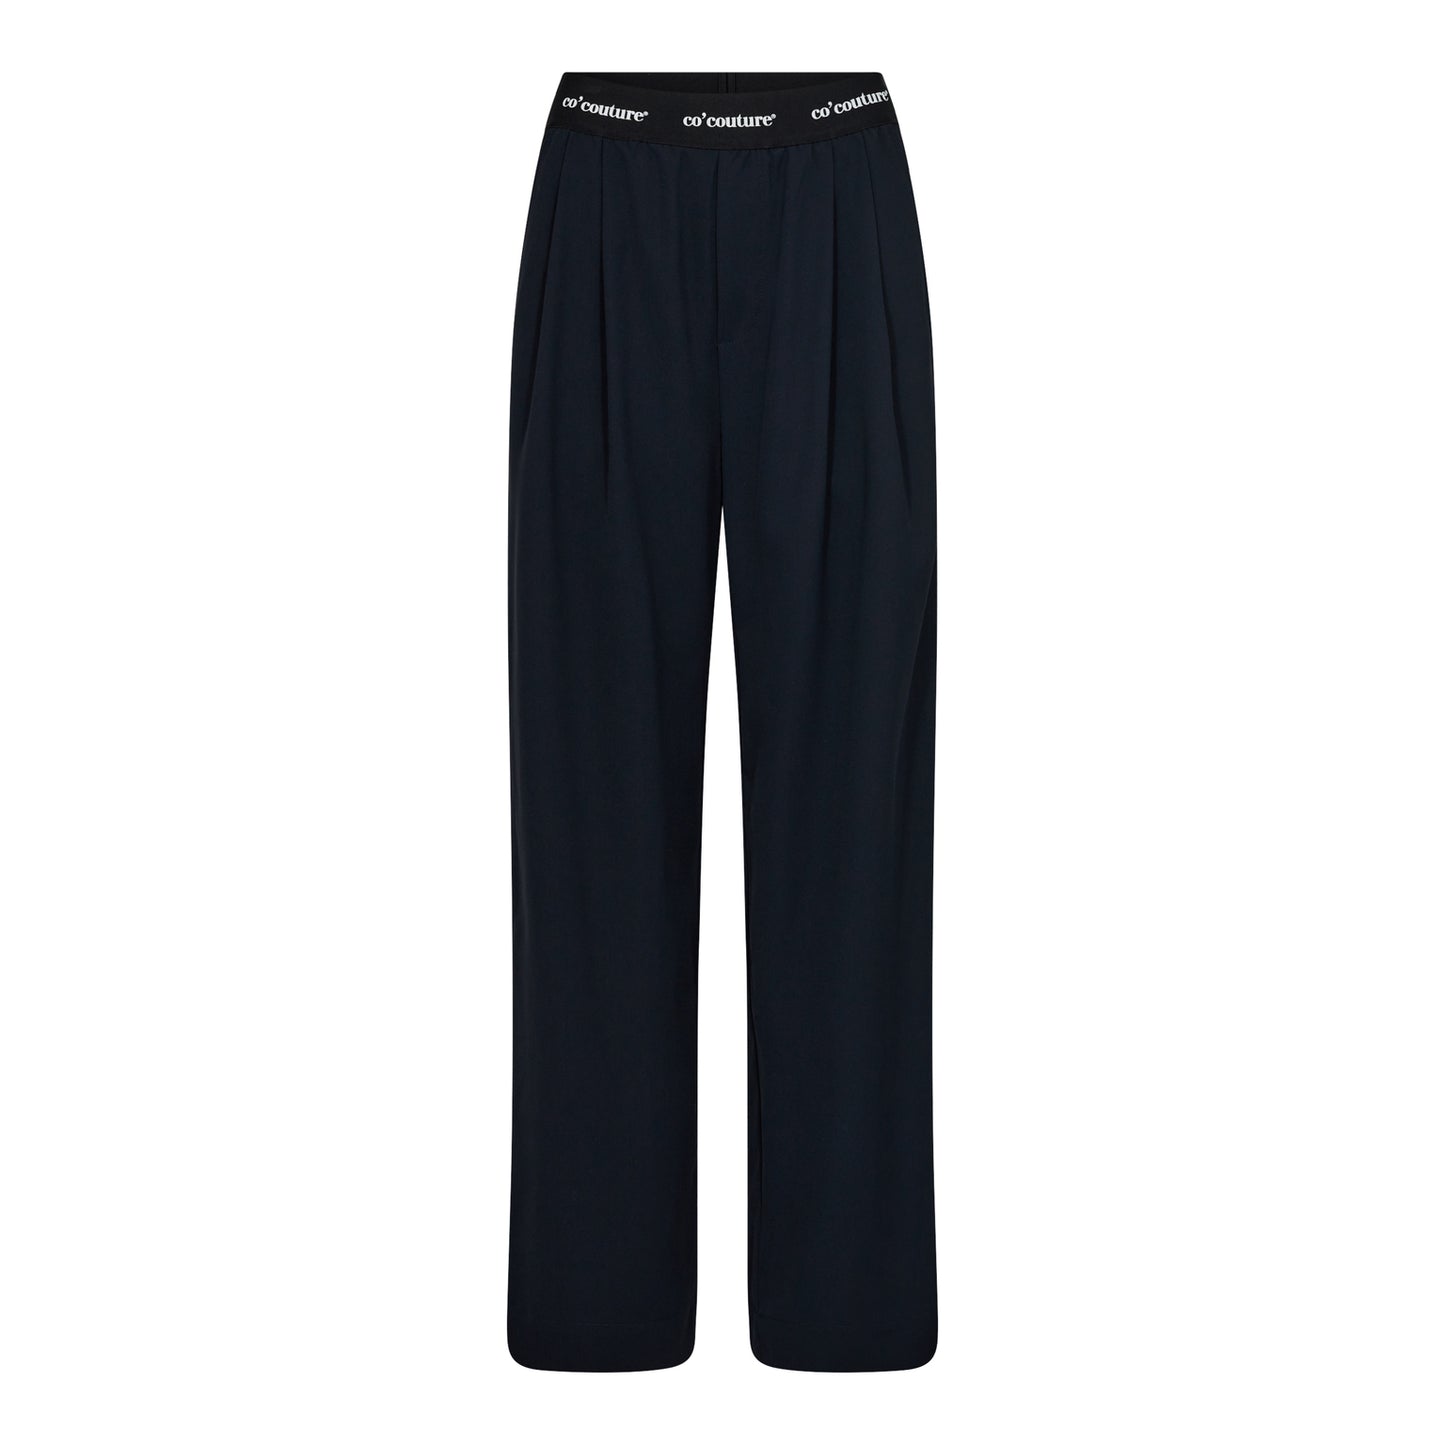 Co'couture | AminaCC Logo Long Pant Navy